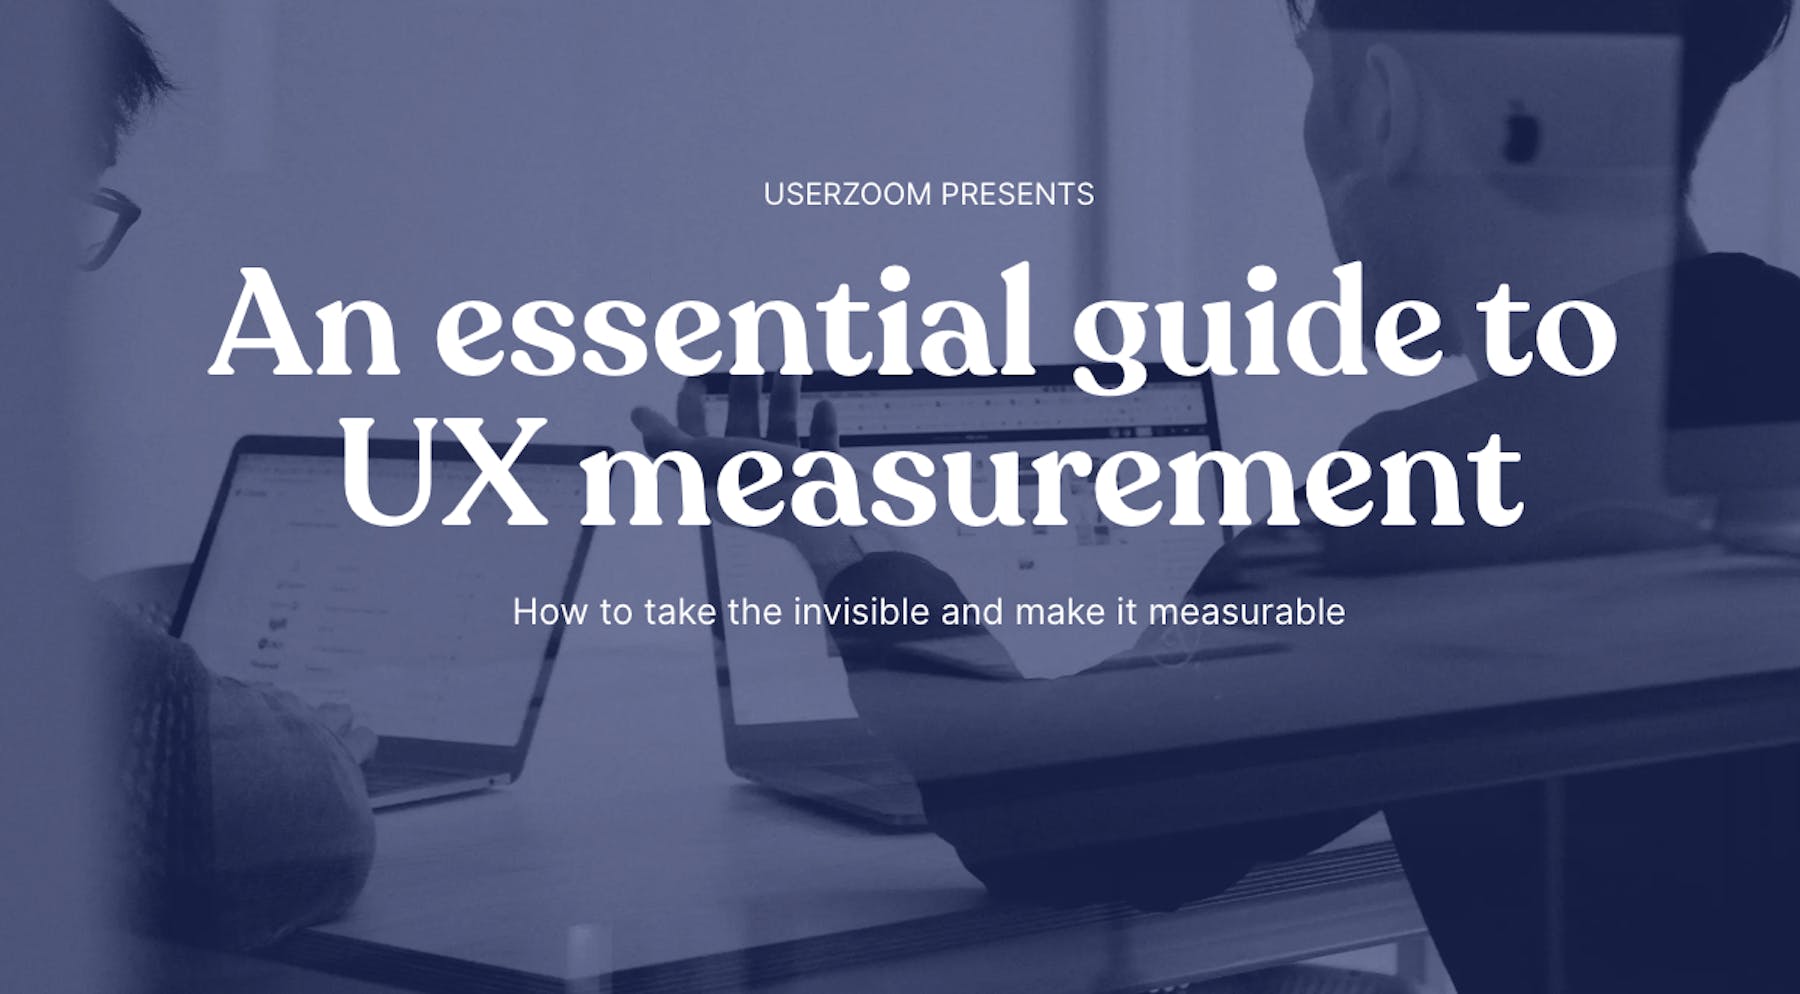 An essential guide to UX measurement